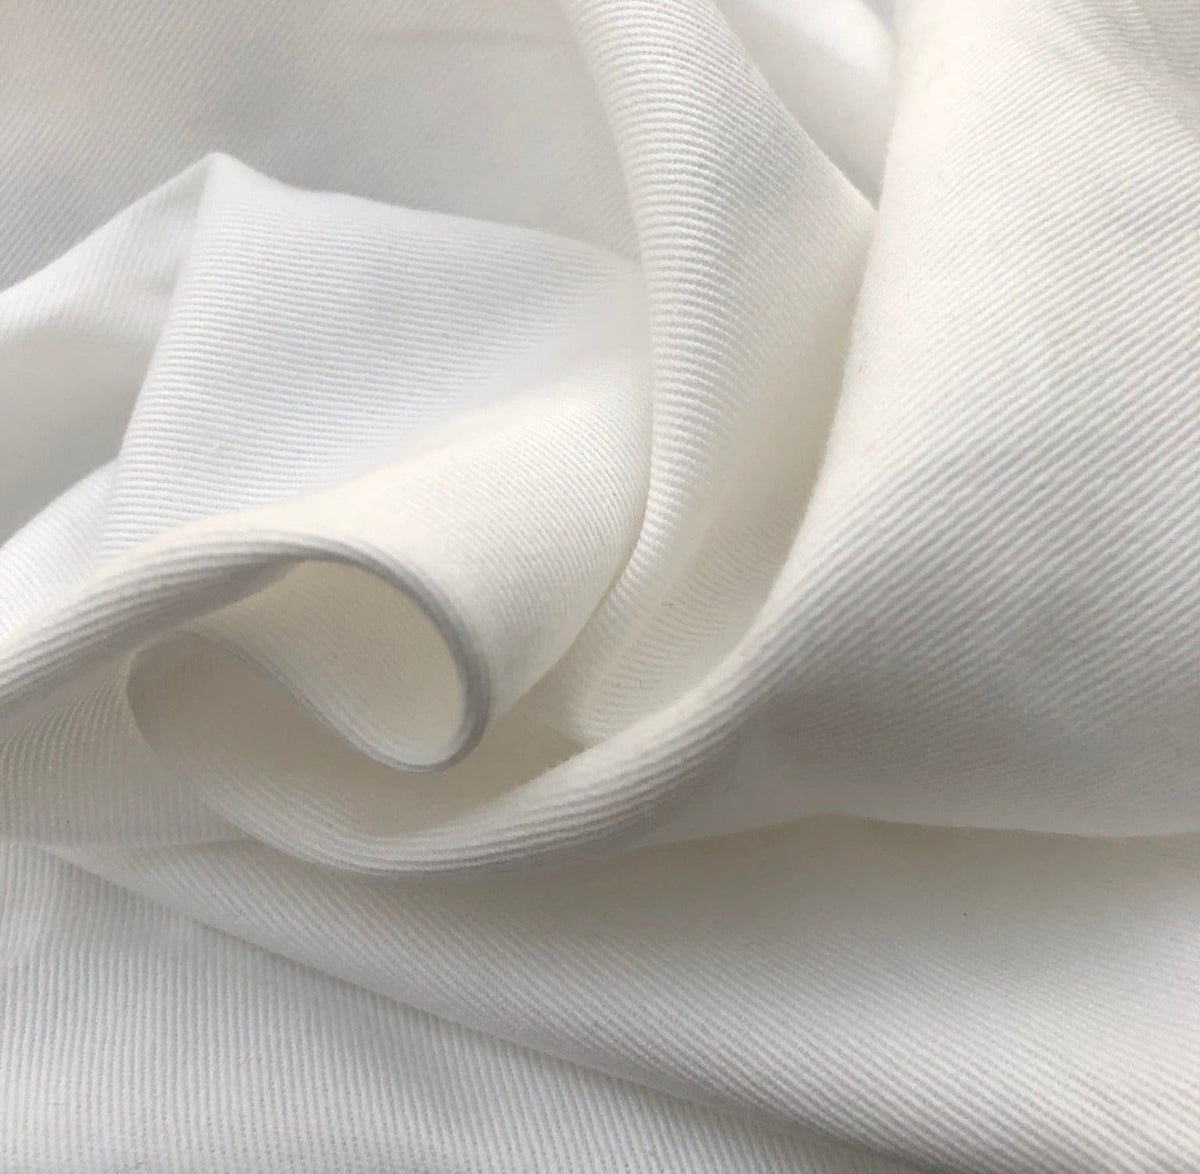 Lining Fabric (Poly/Cotton) - White Twill 60 - By the Yard from